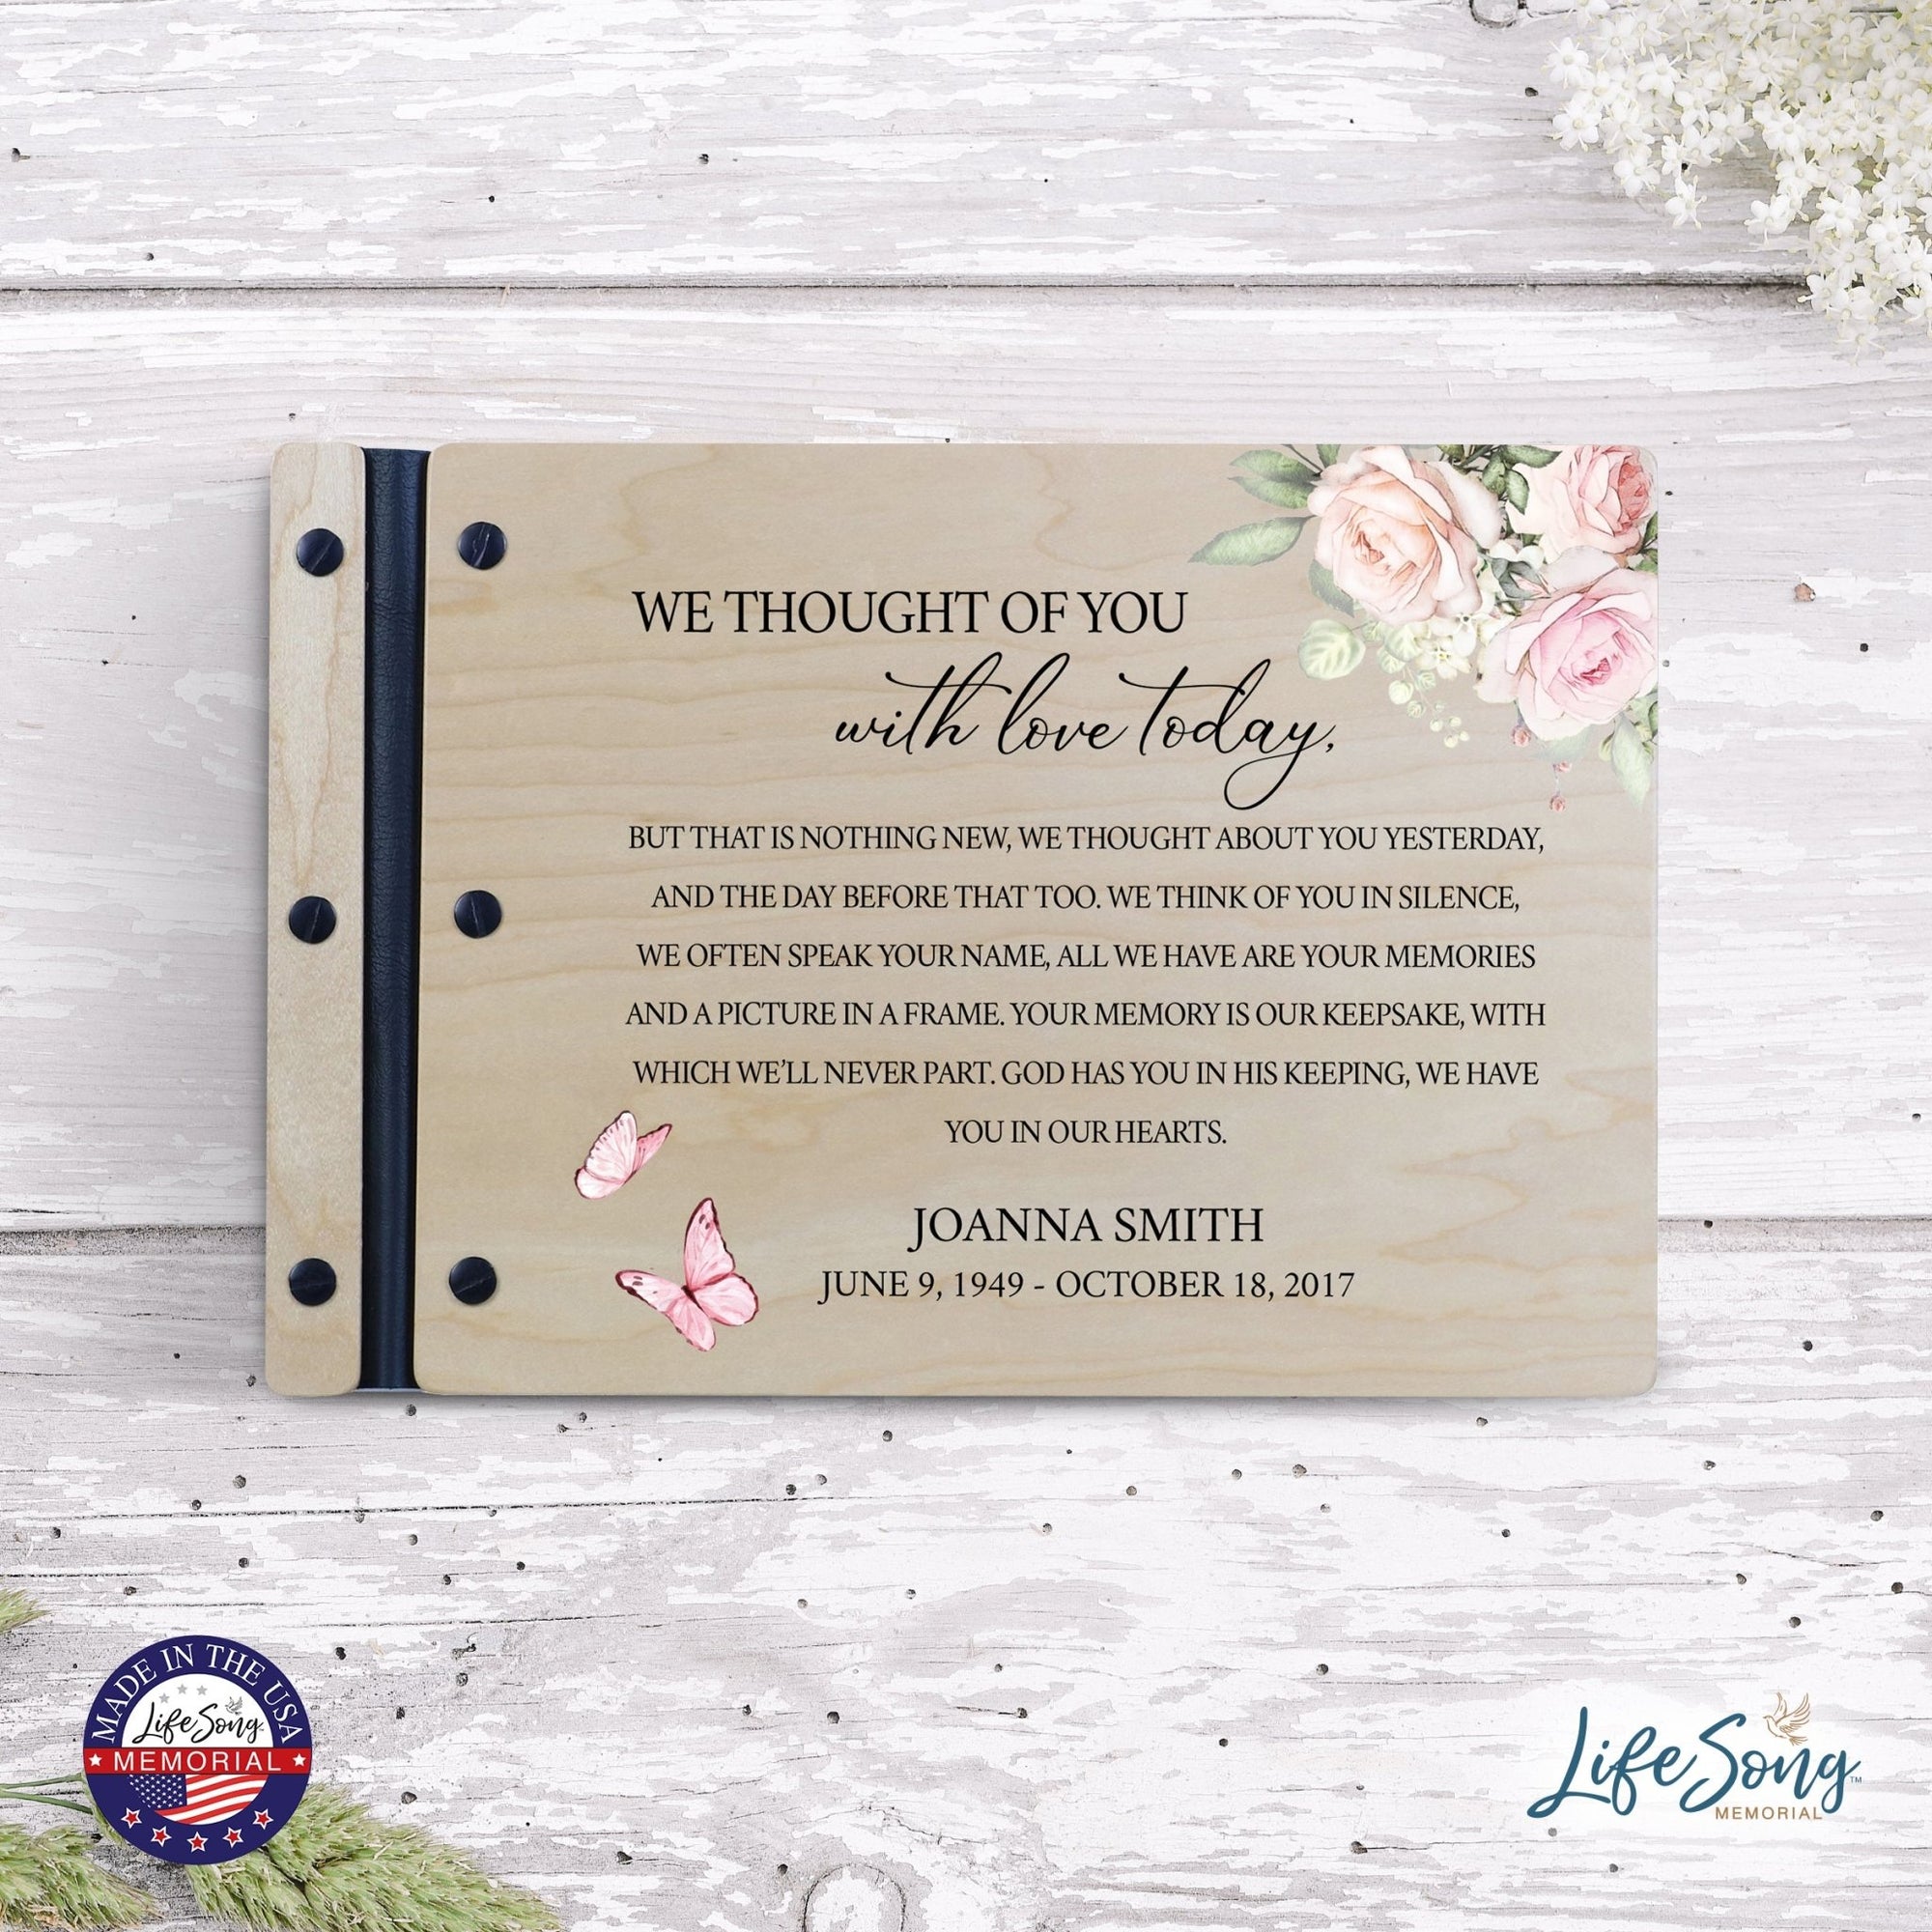 Personalized Medium Wooden Memorial Guestbook 12.375x8.5 - We Thought Of You - LifeSong Milestones